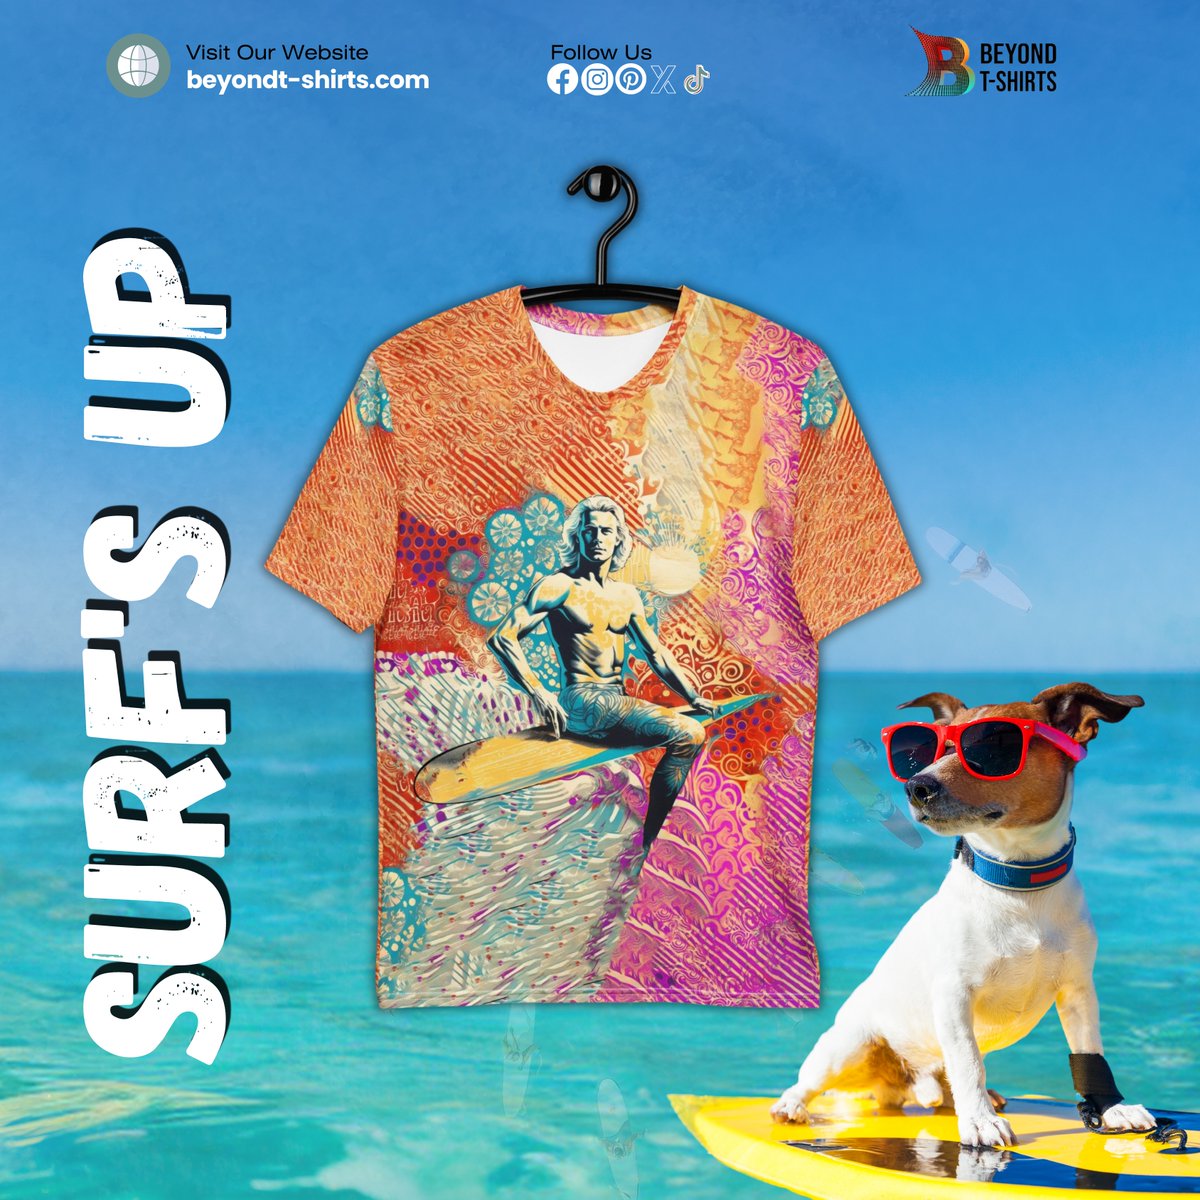 Are you ready to hit the beach and catch some waves? 🏖️ Do you want to show off your surfing skills and style? 🏄‍♂️ If so, you need to check out our new collection of surf-themed t-shirts! 🌊

#SurfsUp
#BeachVibes
#BeyondTShirts
#SurfStyle
#Surfing
#SurfLife